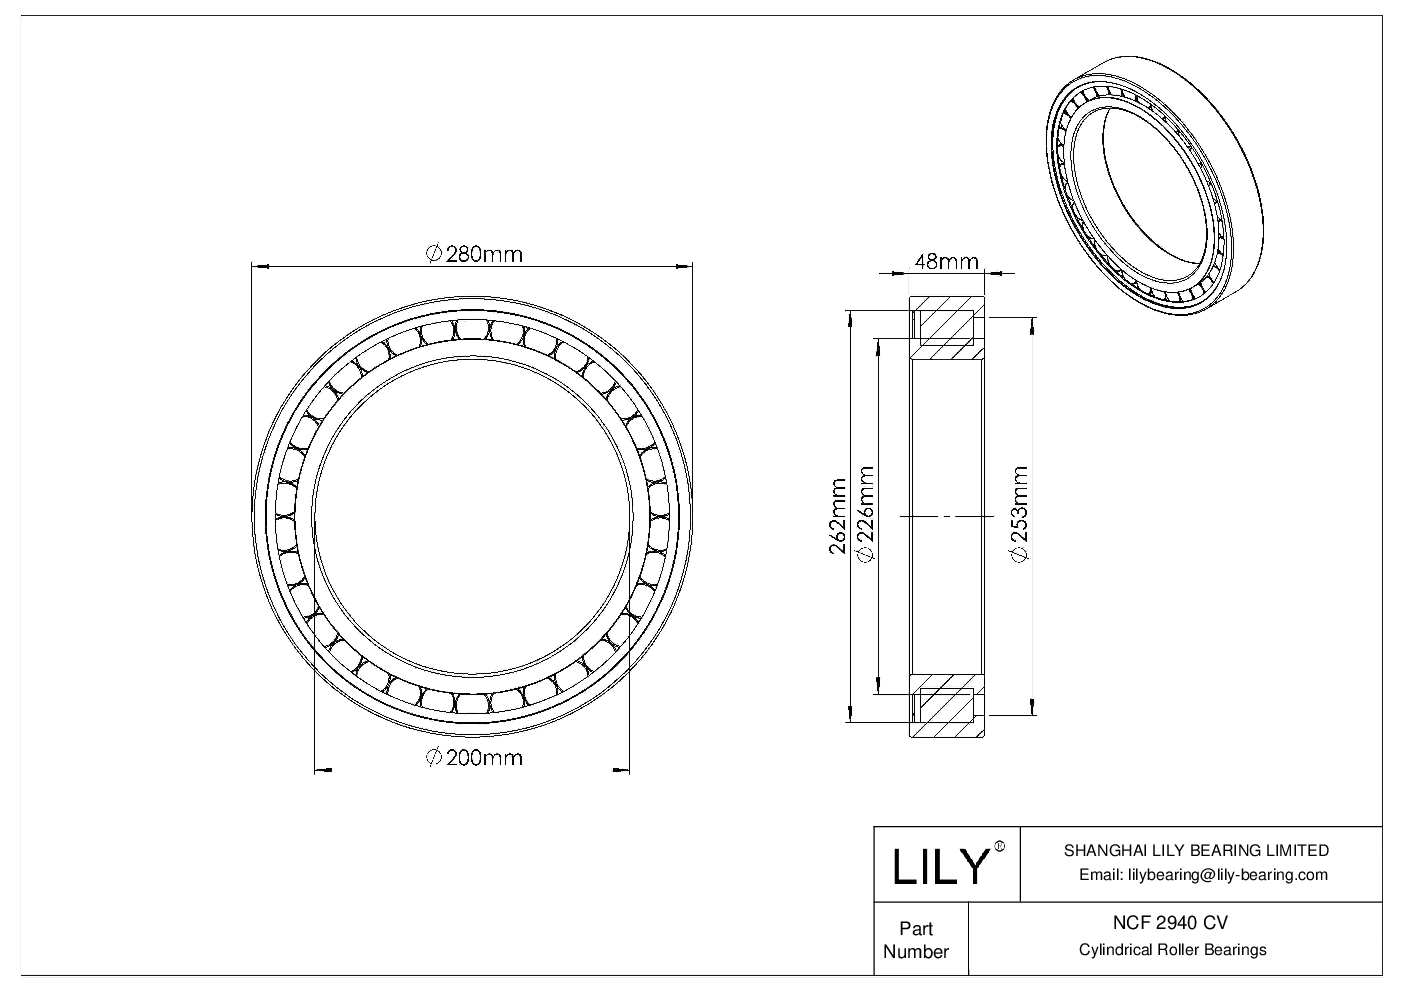 NCF 2940 CV Single Row Full Complement Cylindrical Roller Bearings cad drawing